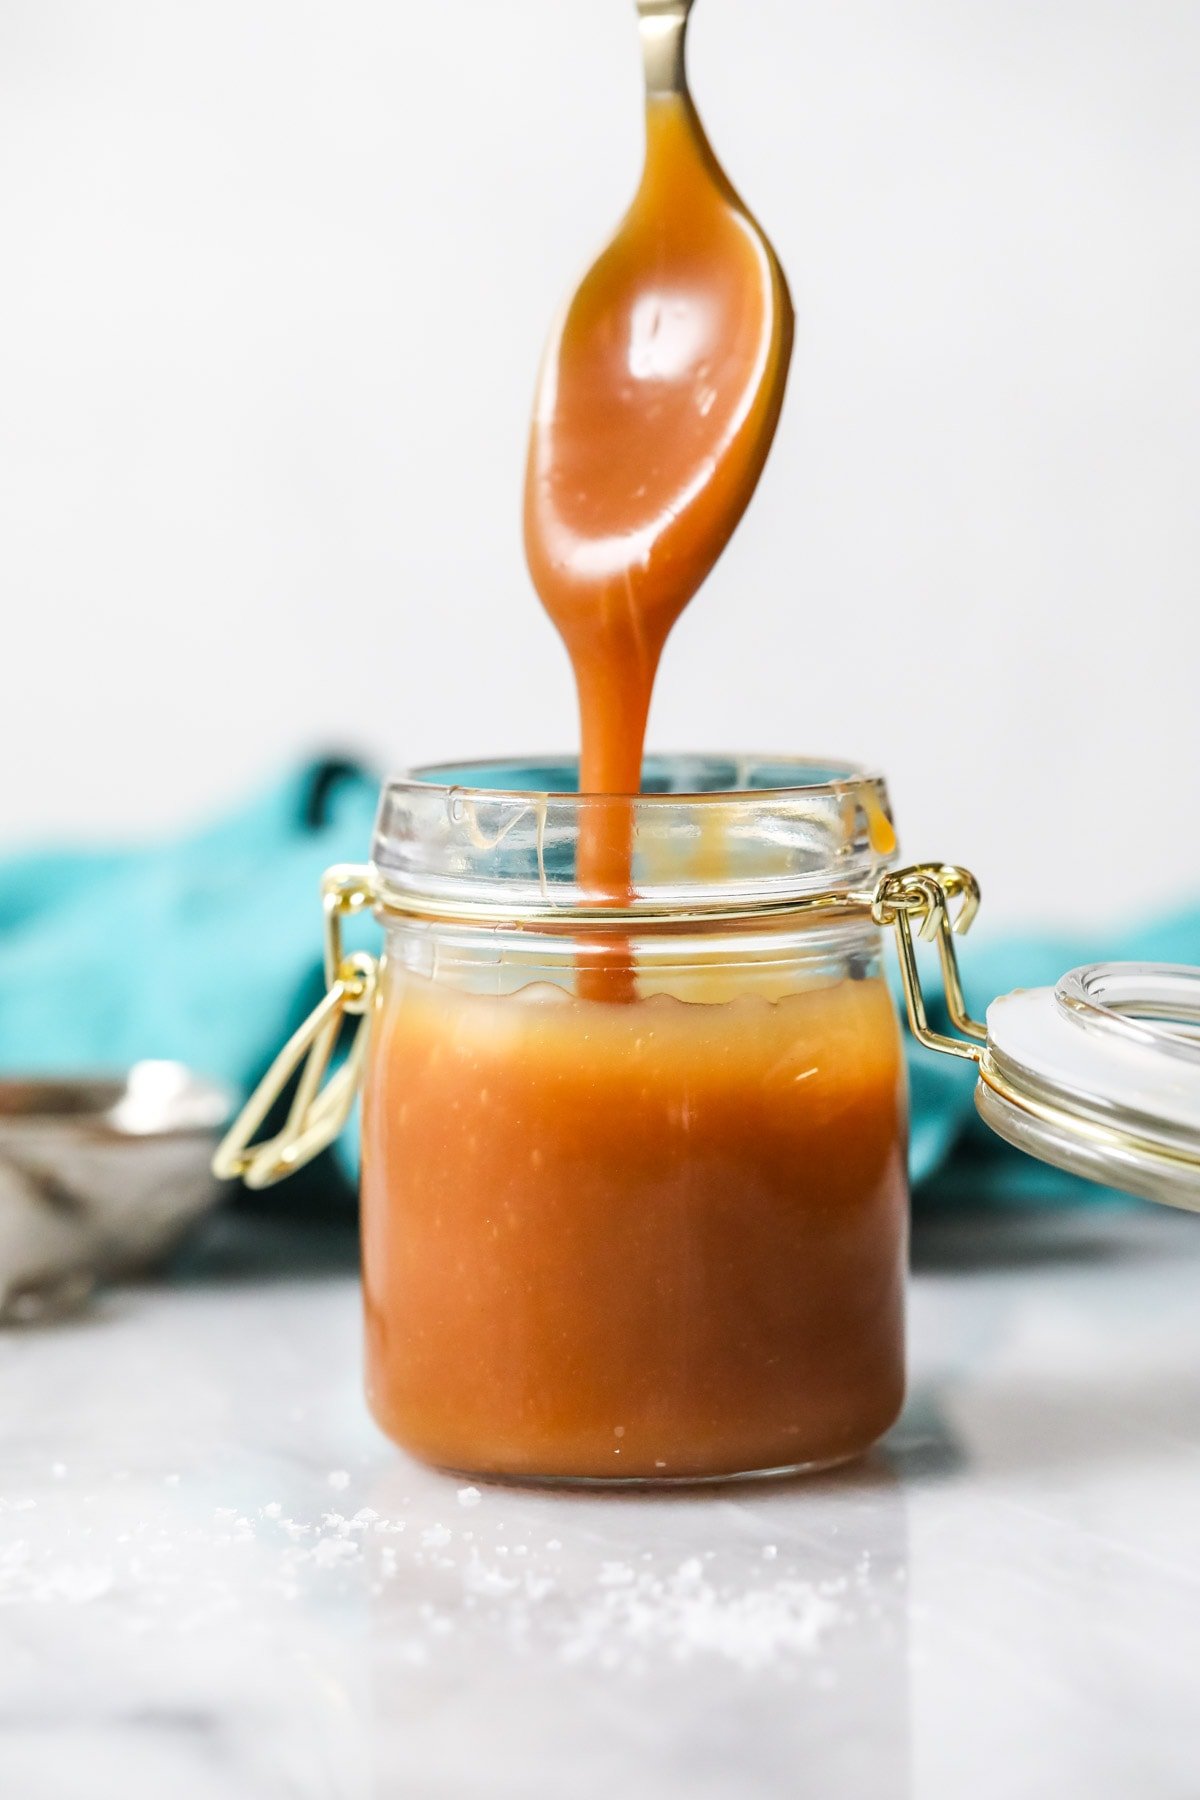 Caramel sauce dripping off a spoon into a jar.